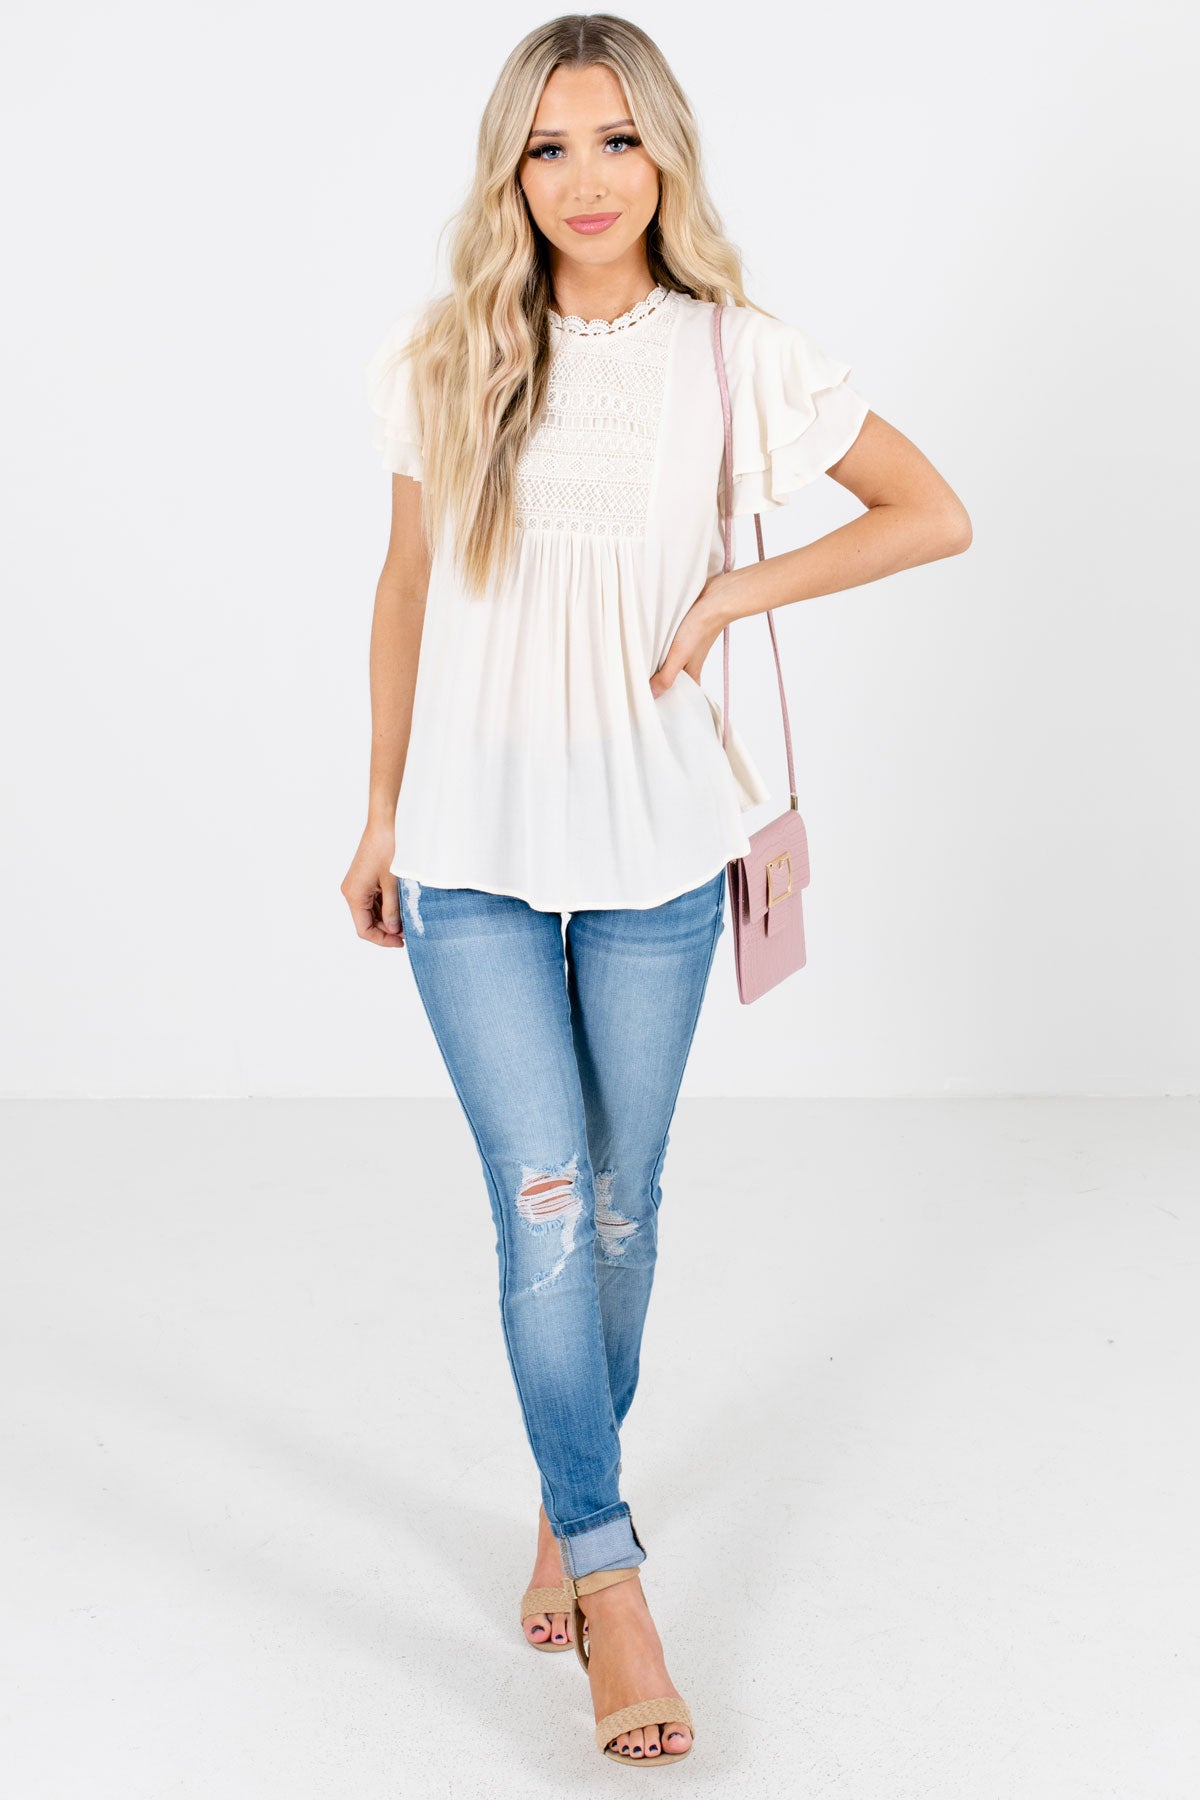 Women's Cream Spring and Summertime Boutique Blouse